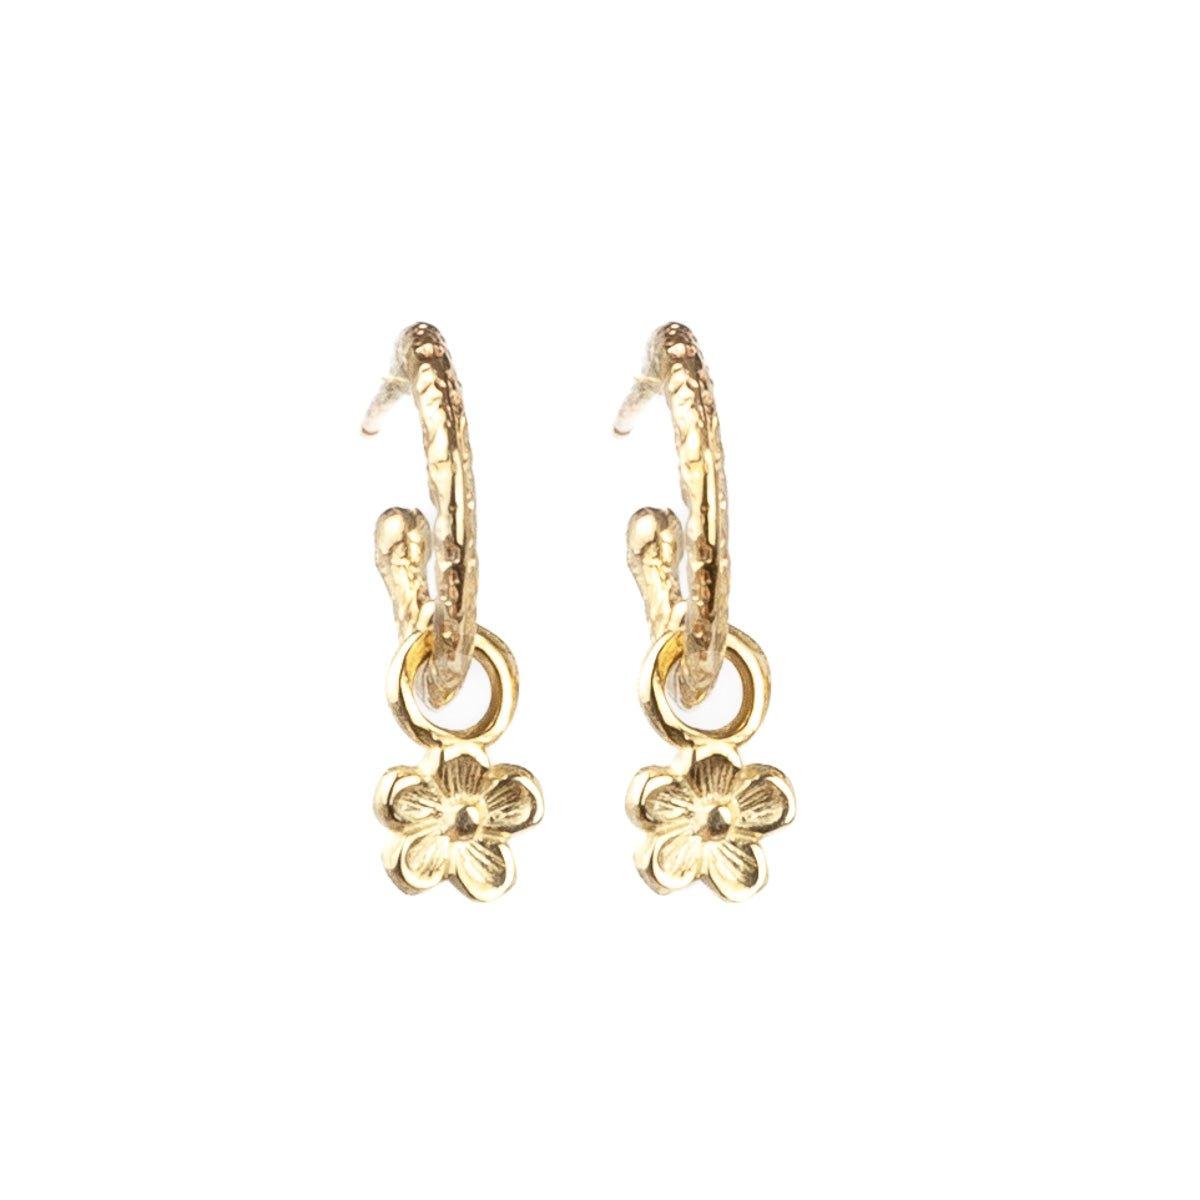 9ct Gold Hoop Earrings With Flower Charm 